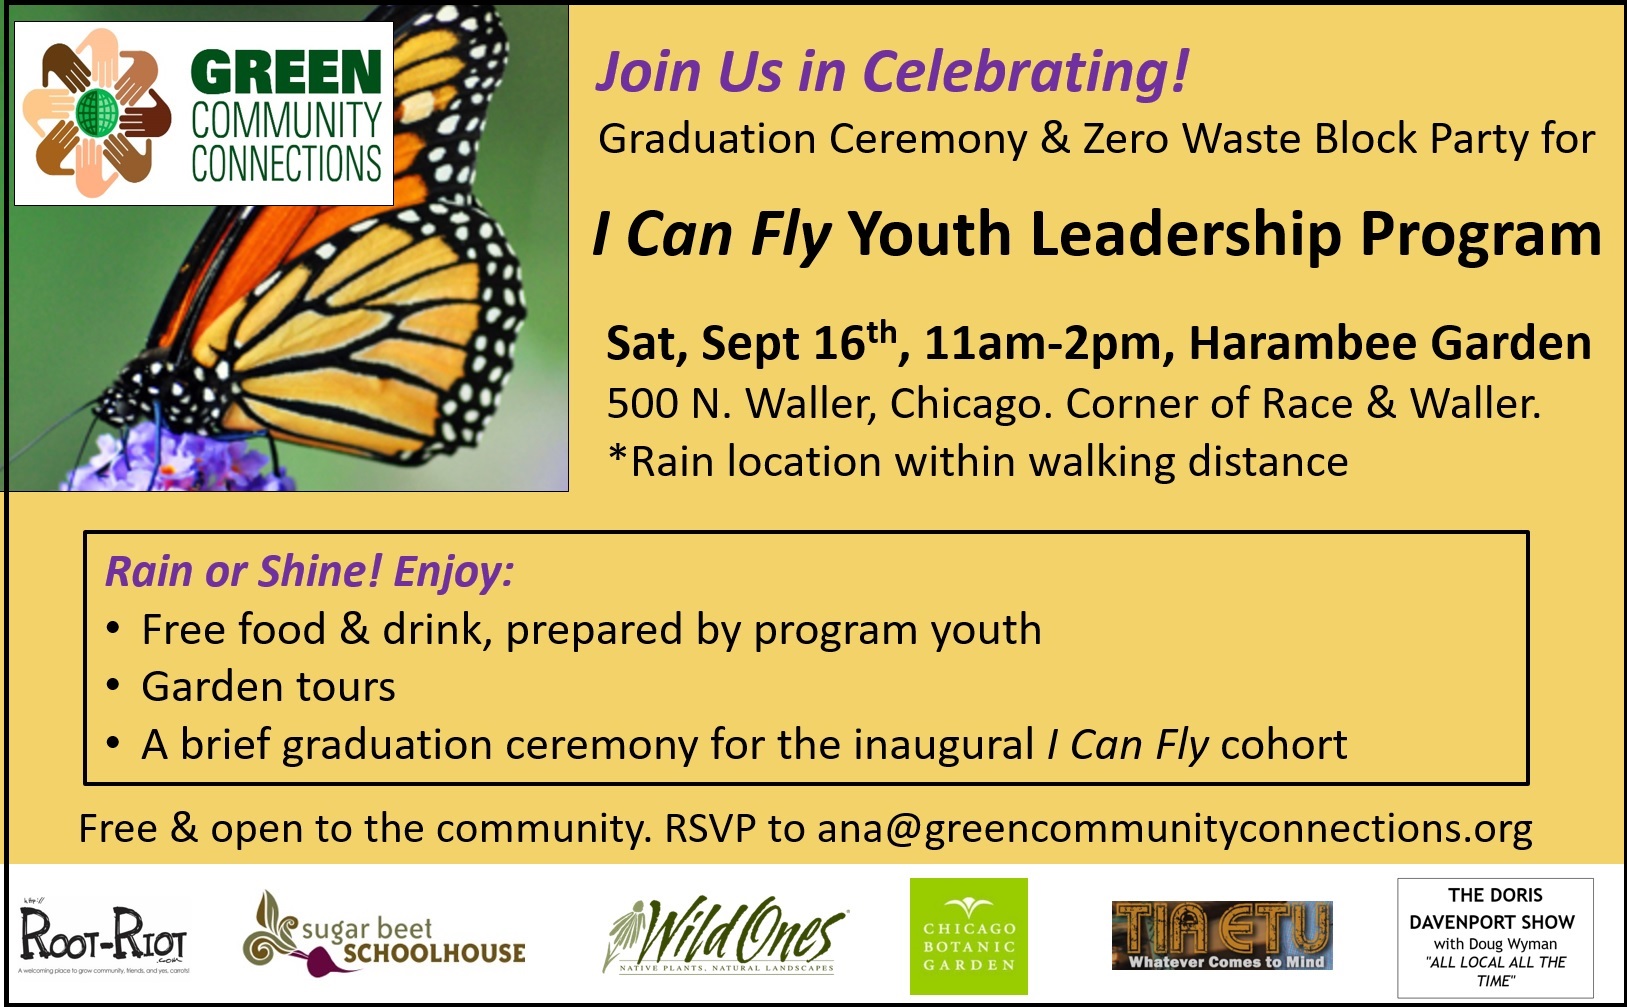 Join us for the I Can Fly Youth Leadership Program graduation ceremony and zero waste block party on Saturday, September 16th from 11am to 2pm at Harambee Garden in Chicago's Austin community, 500 N. Waller Chicago. Free and open to the community. Free food and drink. 